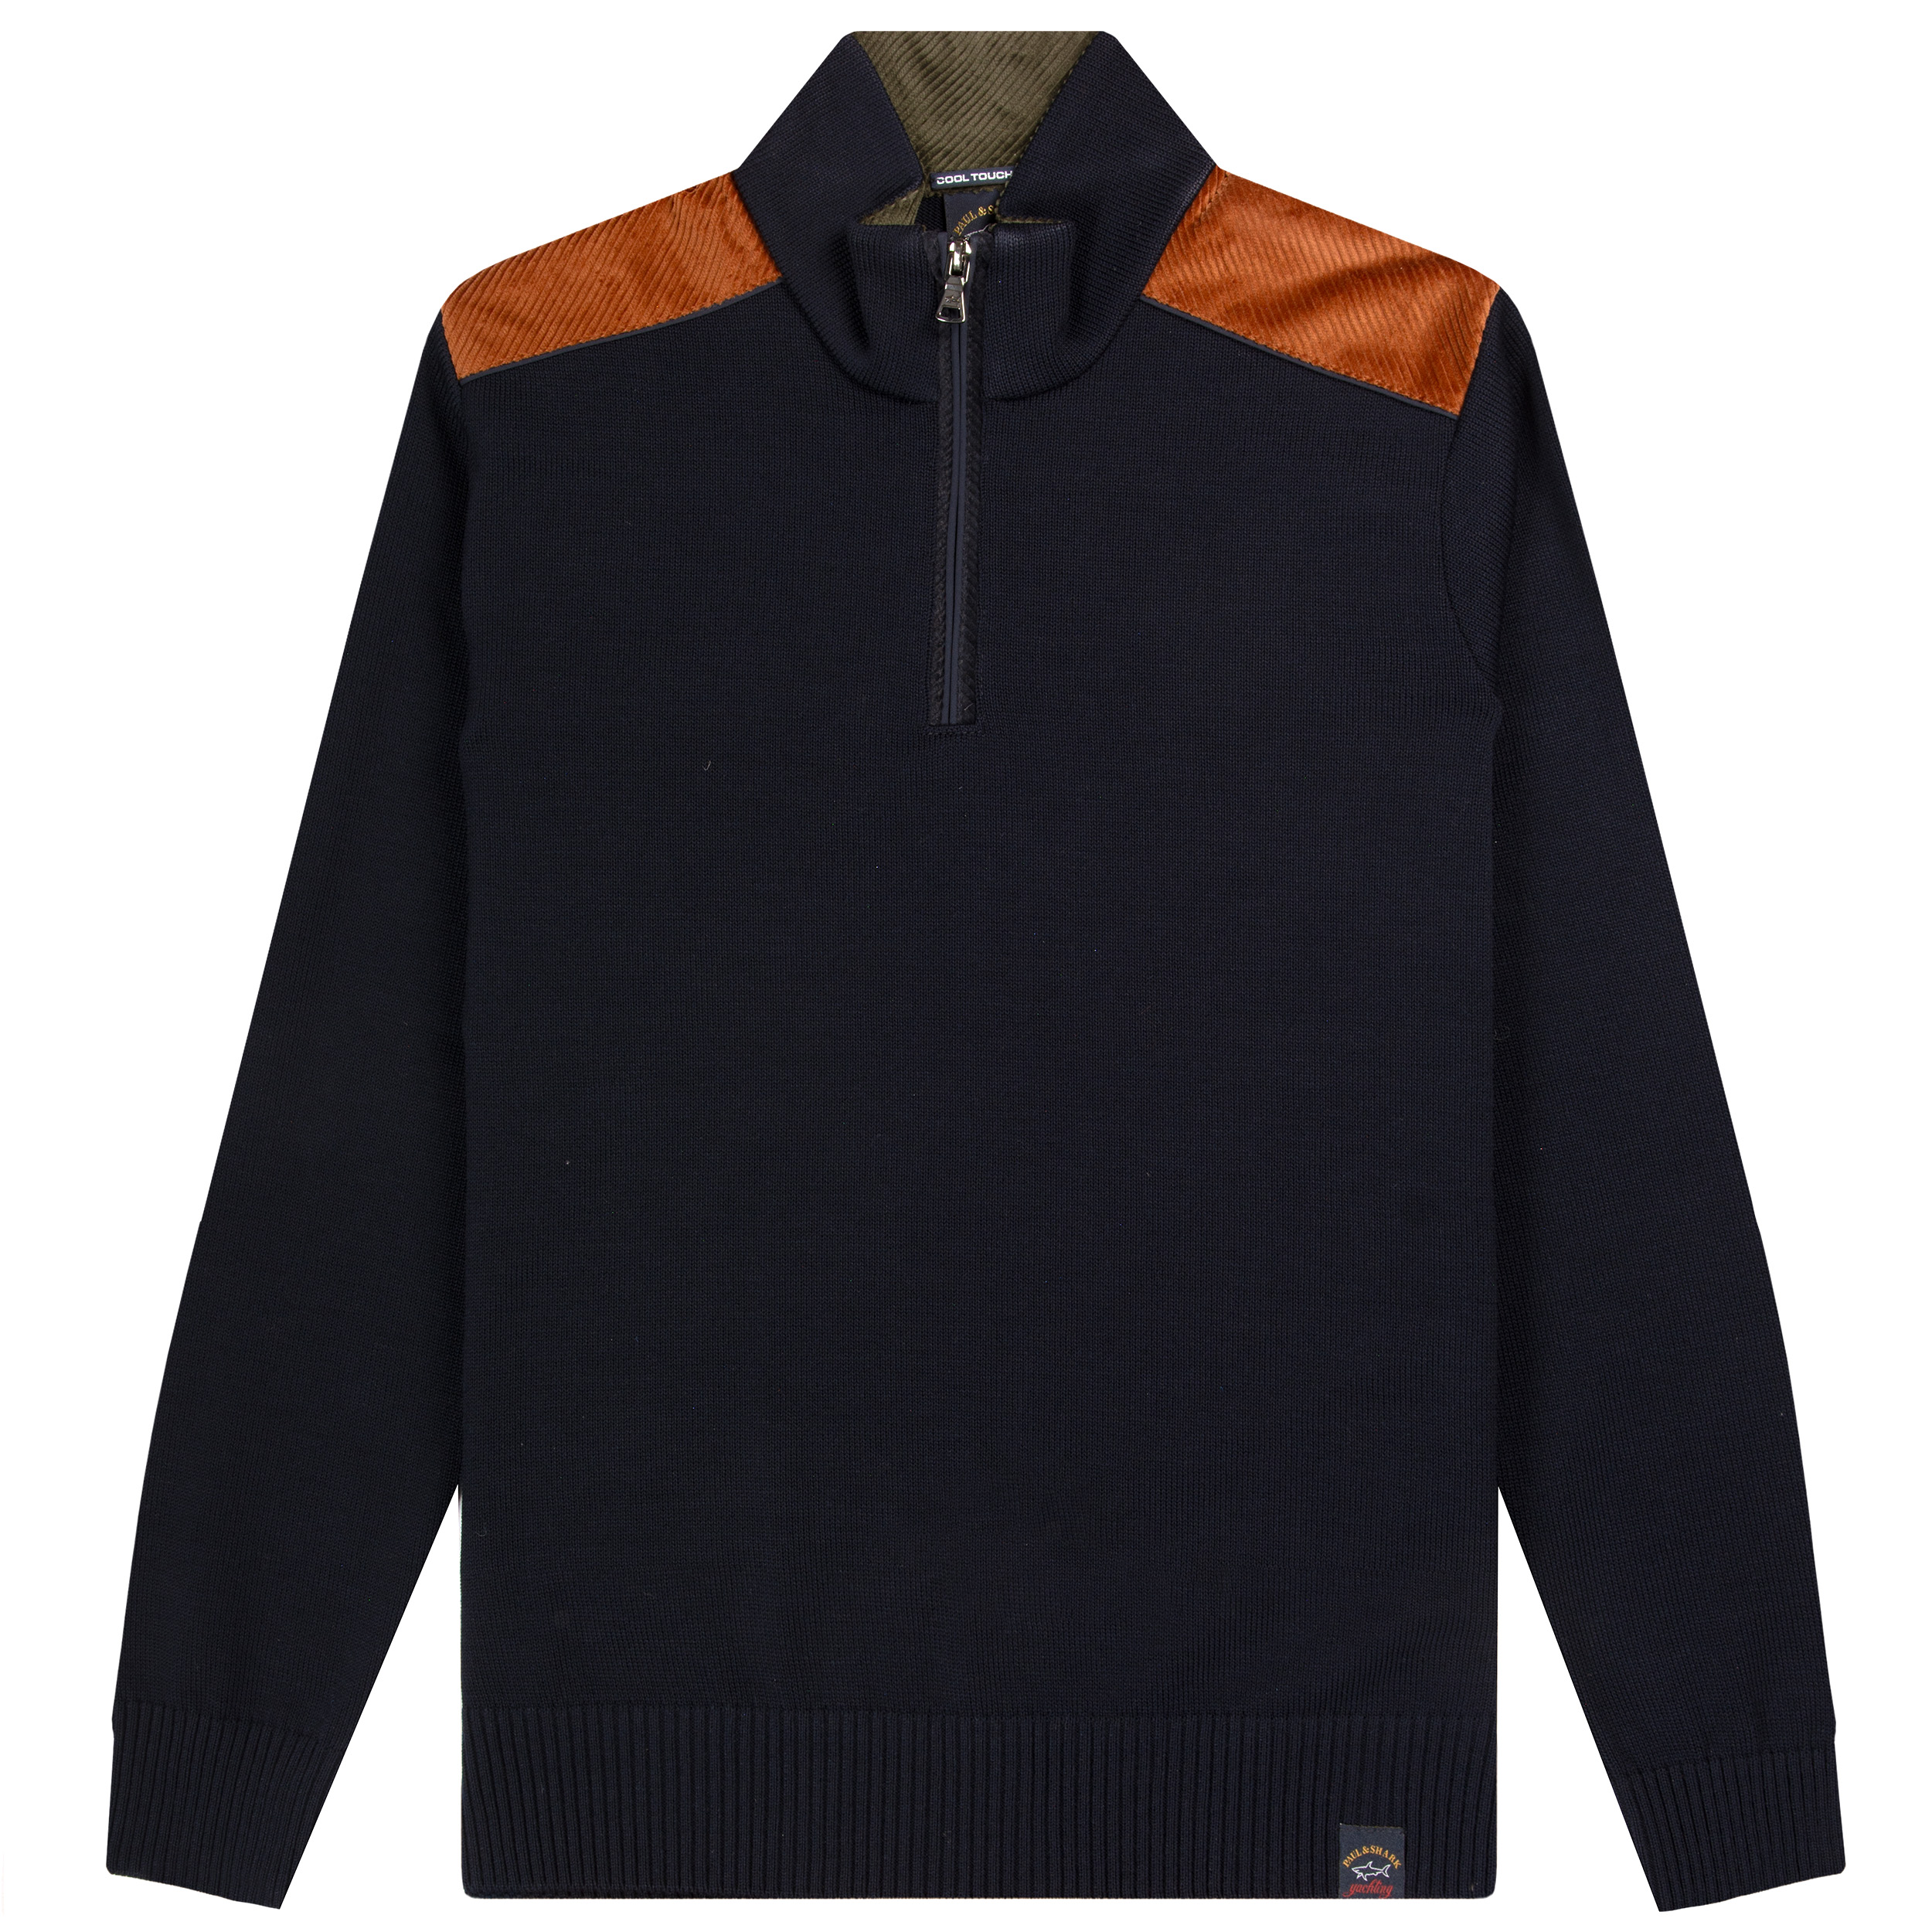 Paul & Shark Cool Touch 4.0 Pullover 1/4 Zip Knit Navy